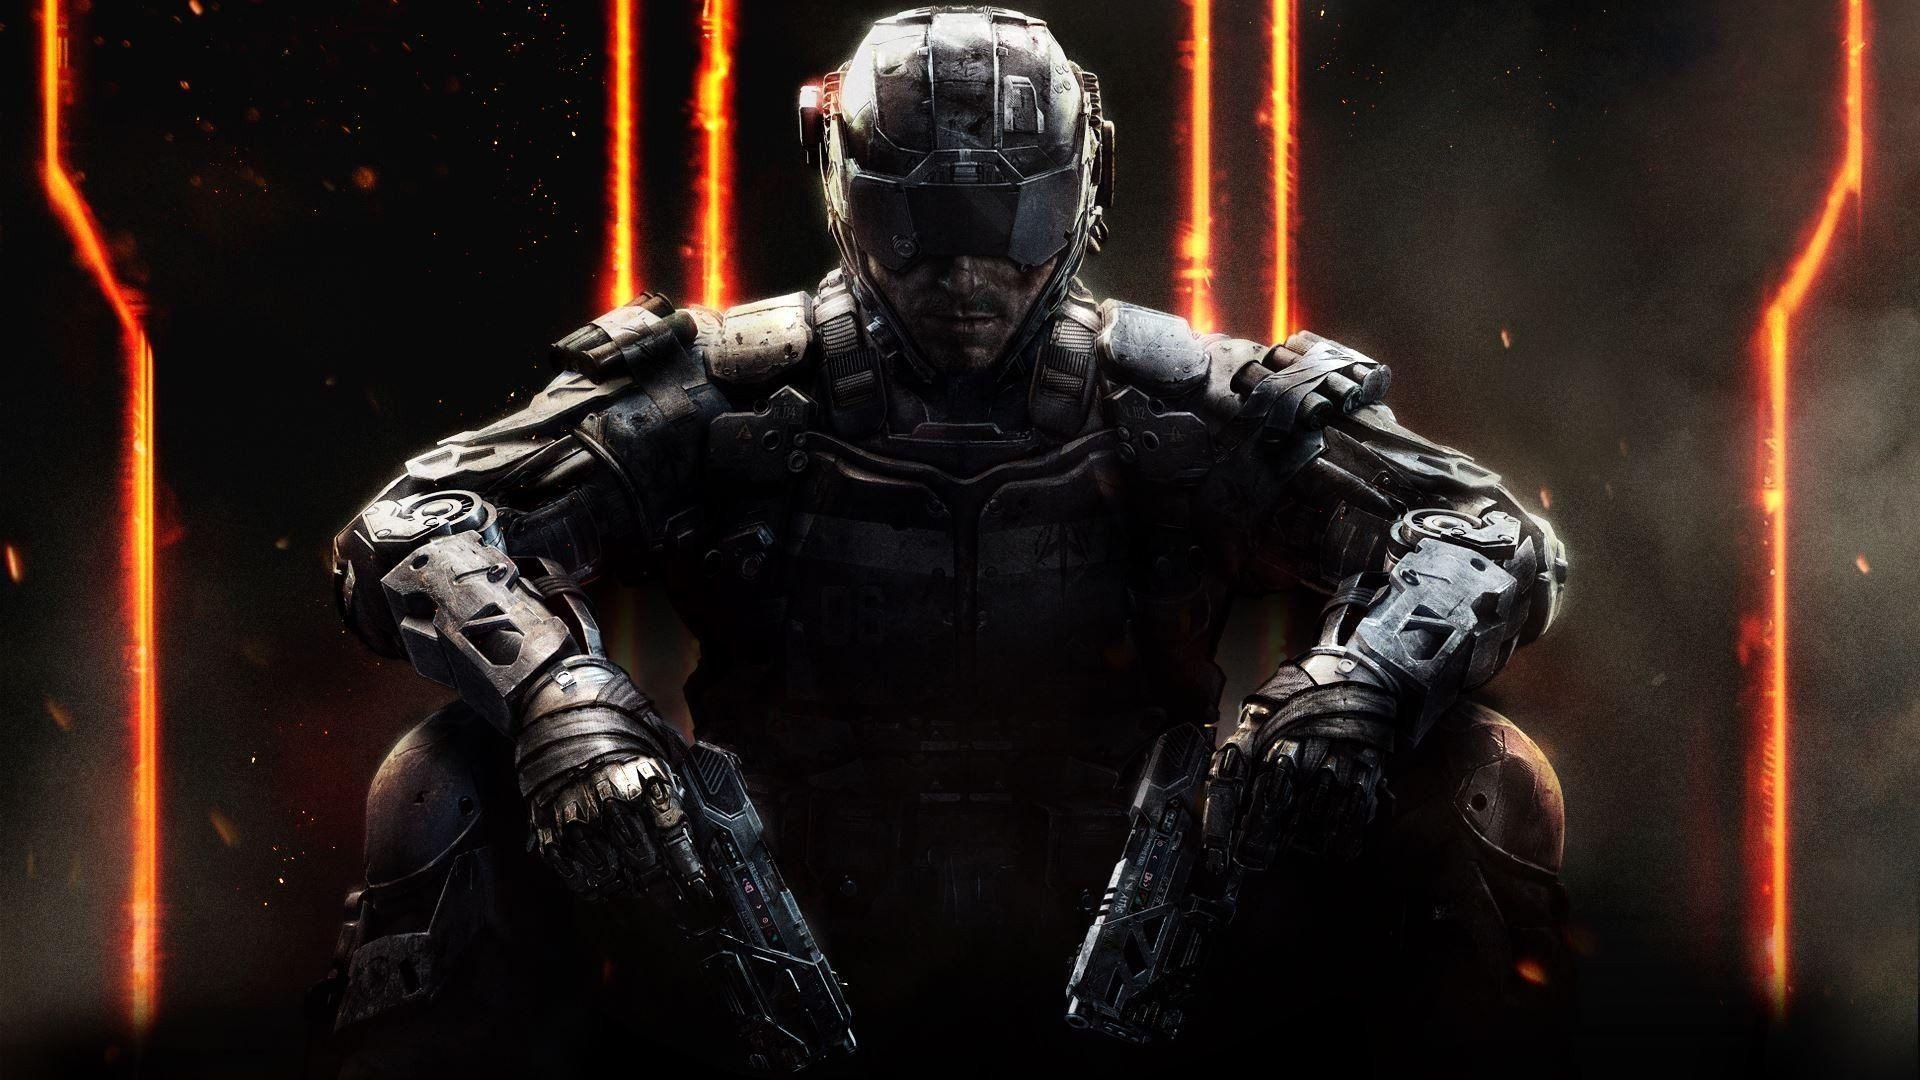 Call of Duty Black Ops 3 Wallpaper Free Call of Duty